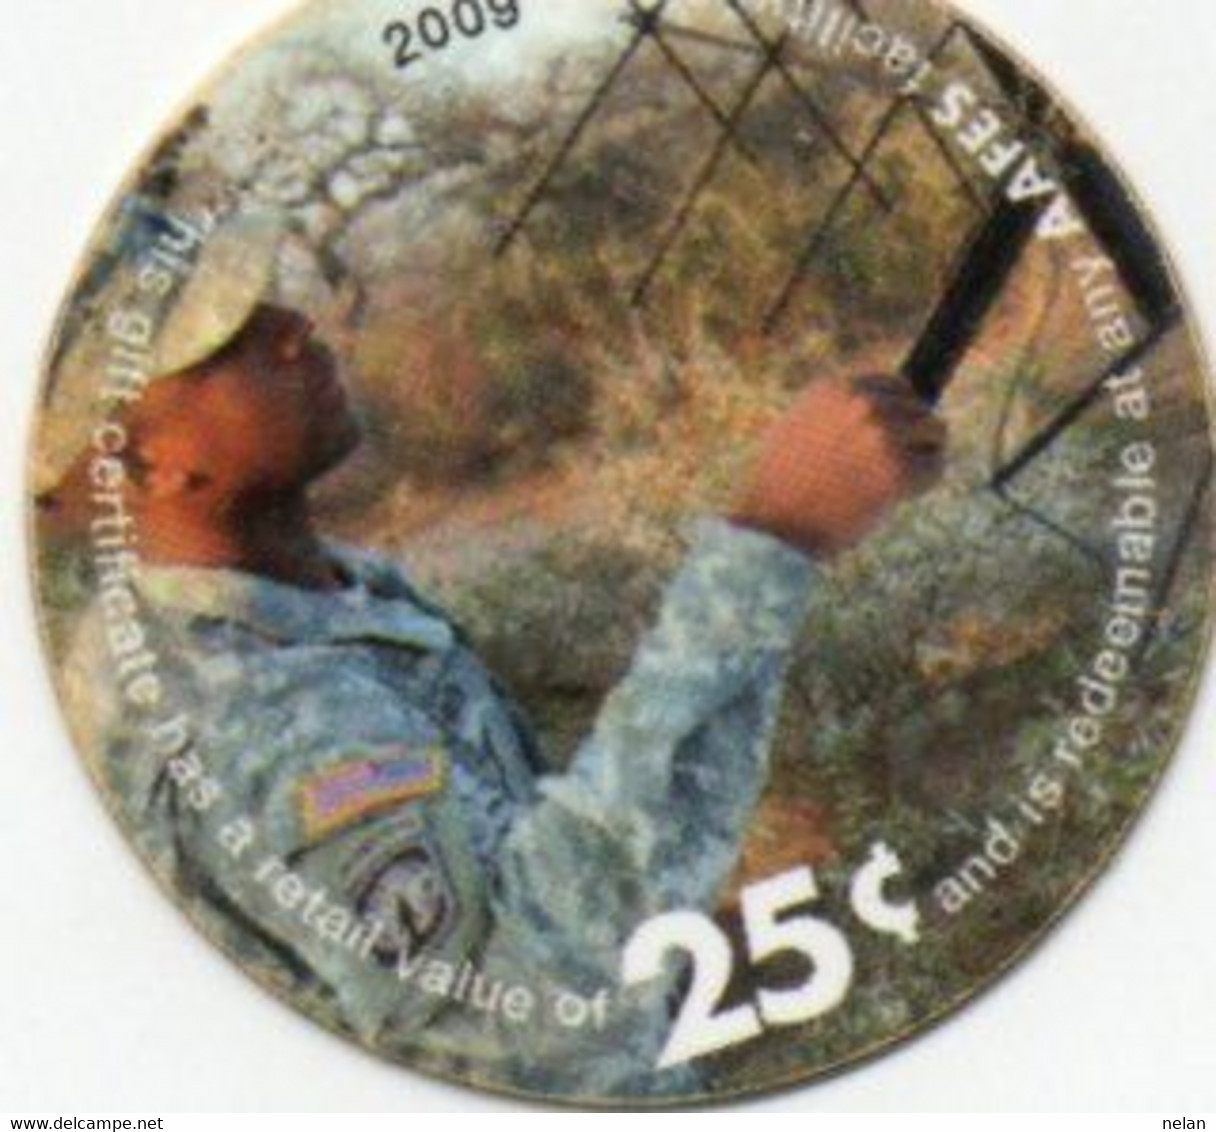 Stati Uniti D'America - 25 Cents - 2009  -Military Payment AAFES Certificates Series 13th Issue -Wor:P-M516 - Plastic - Reeksen 701